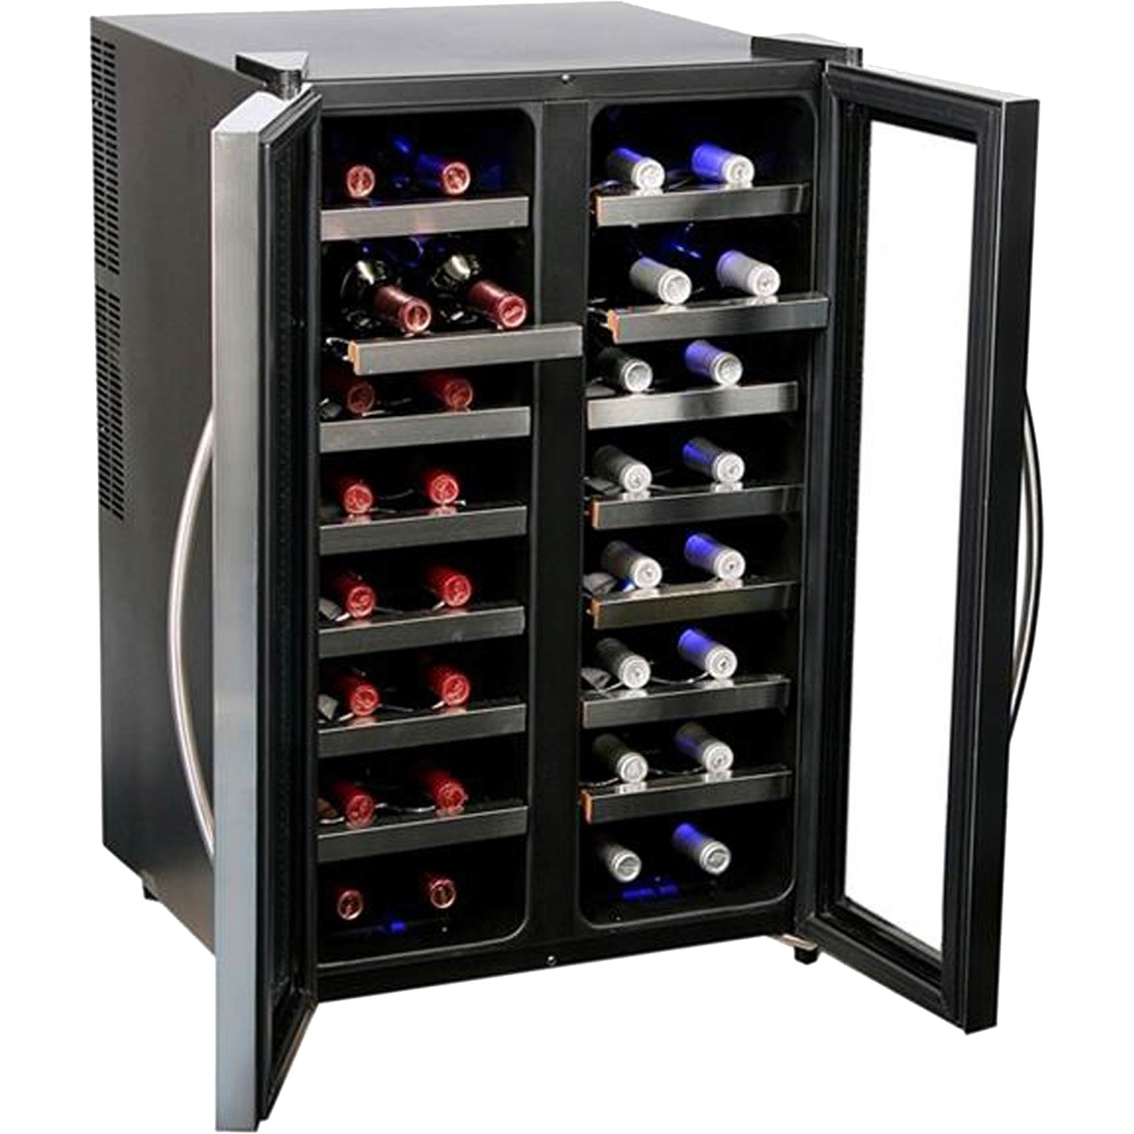 Whynter 32 Bottle Dual Temperature Zone Wine Cooler - Image 2 of 4